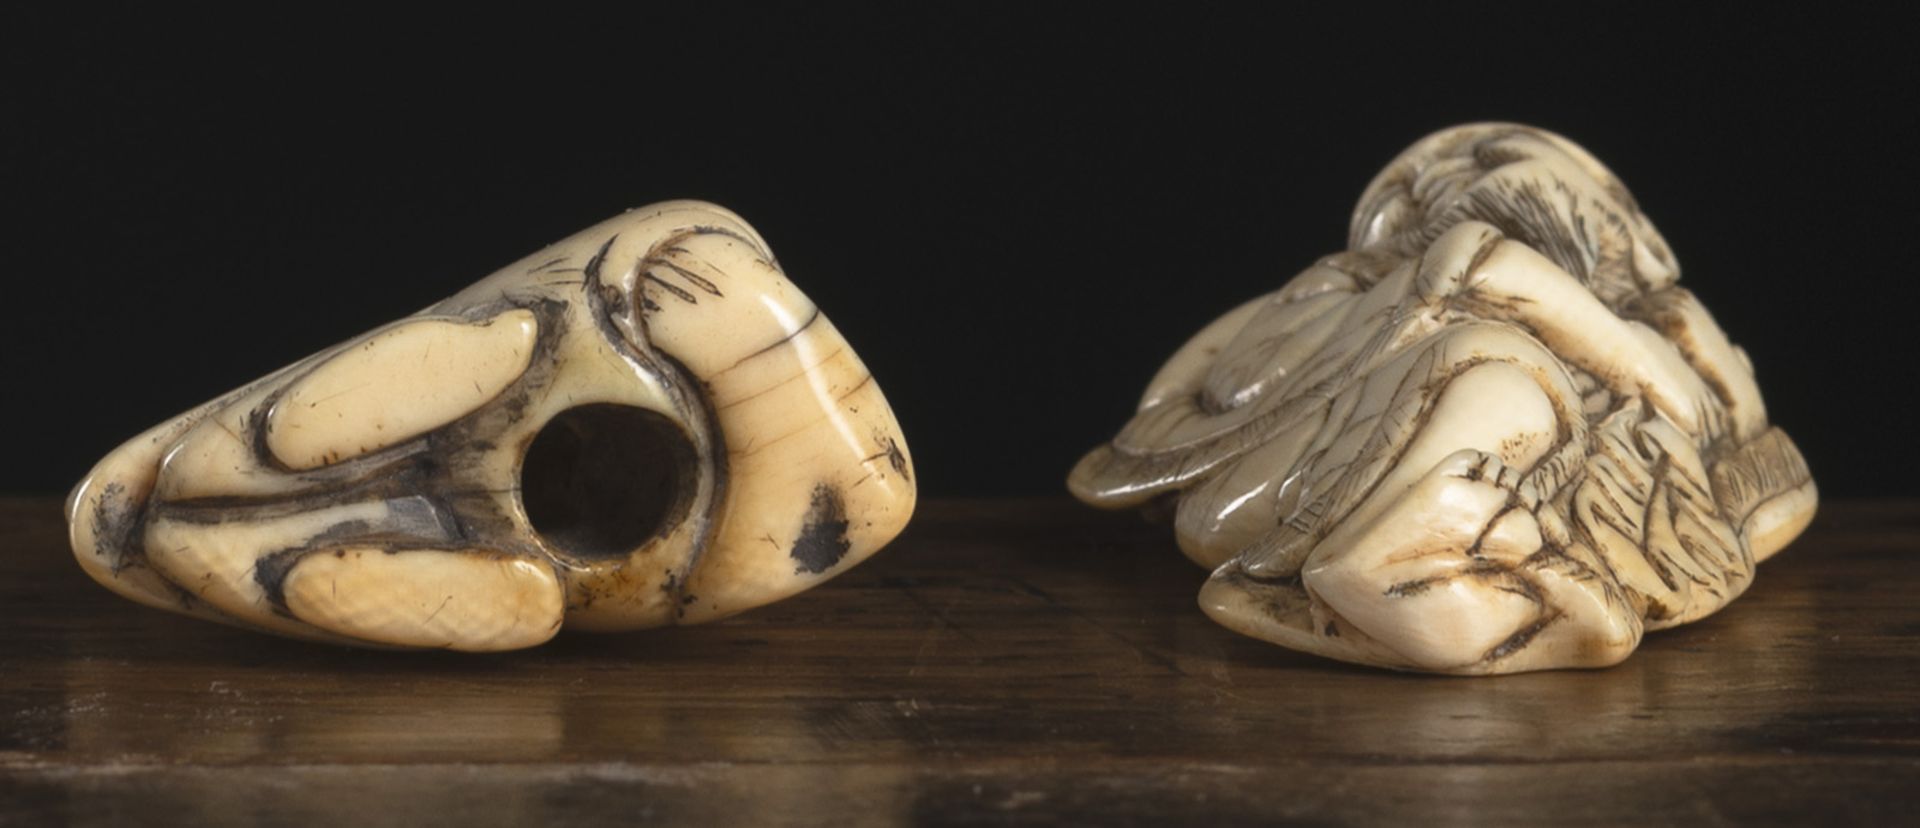 TWO IVORY NETSUKE: SENNIN OR HOTEI WITH A BAG ON HIS SHOULDER AND STANDING CHINESE WITH A LARGE BAG - Image 3 of 5